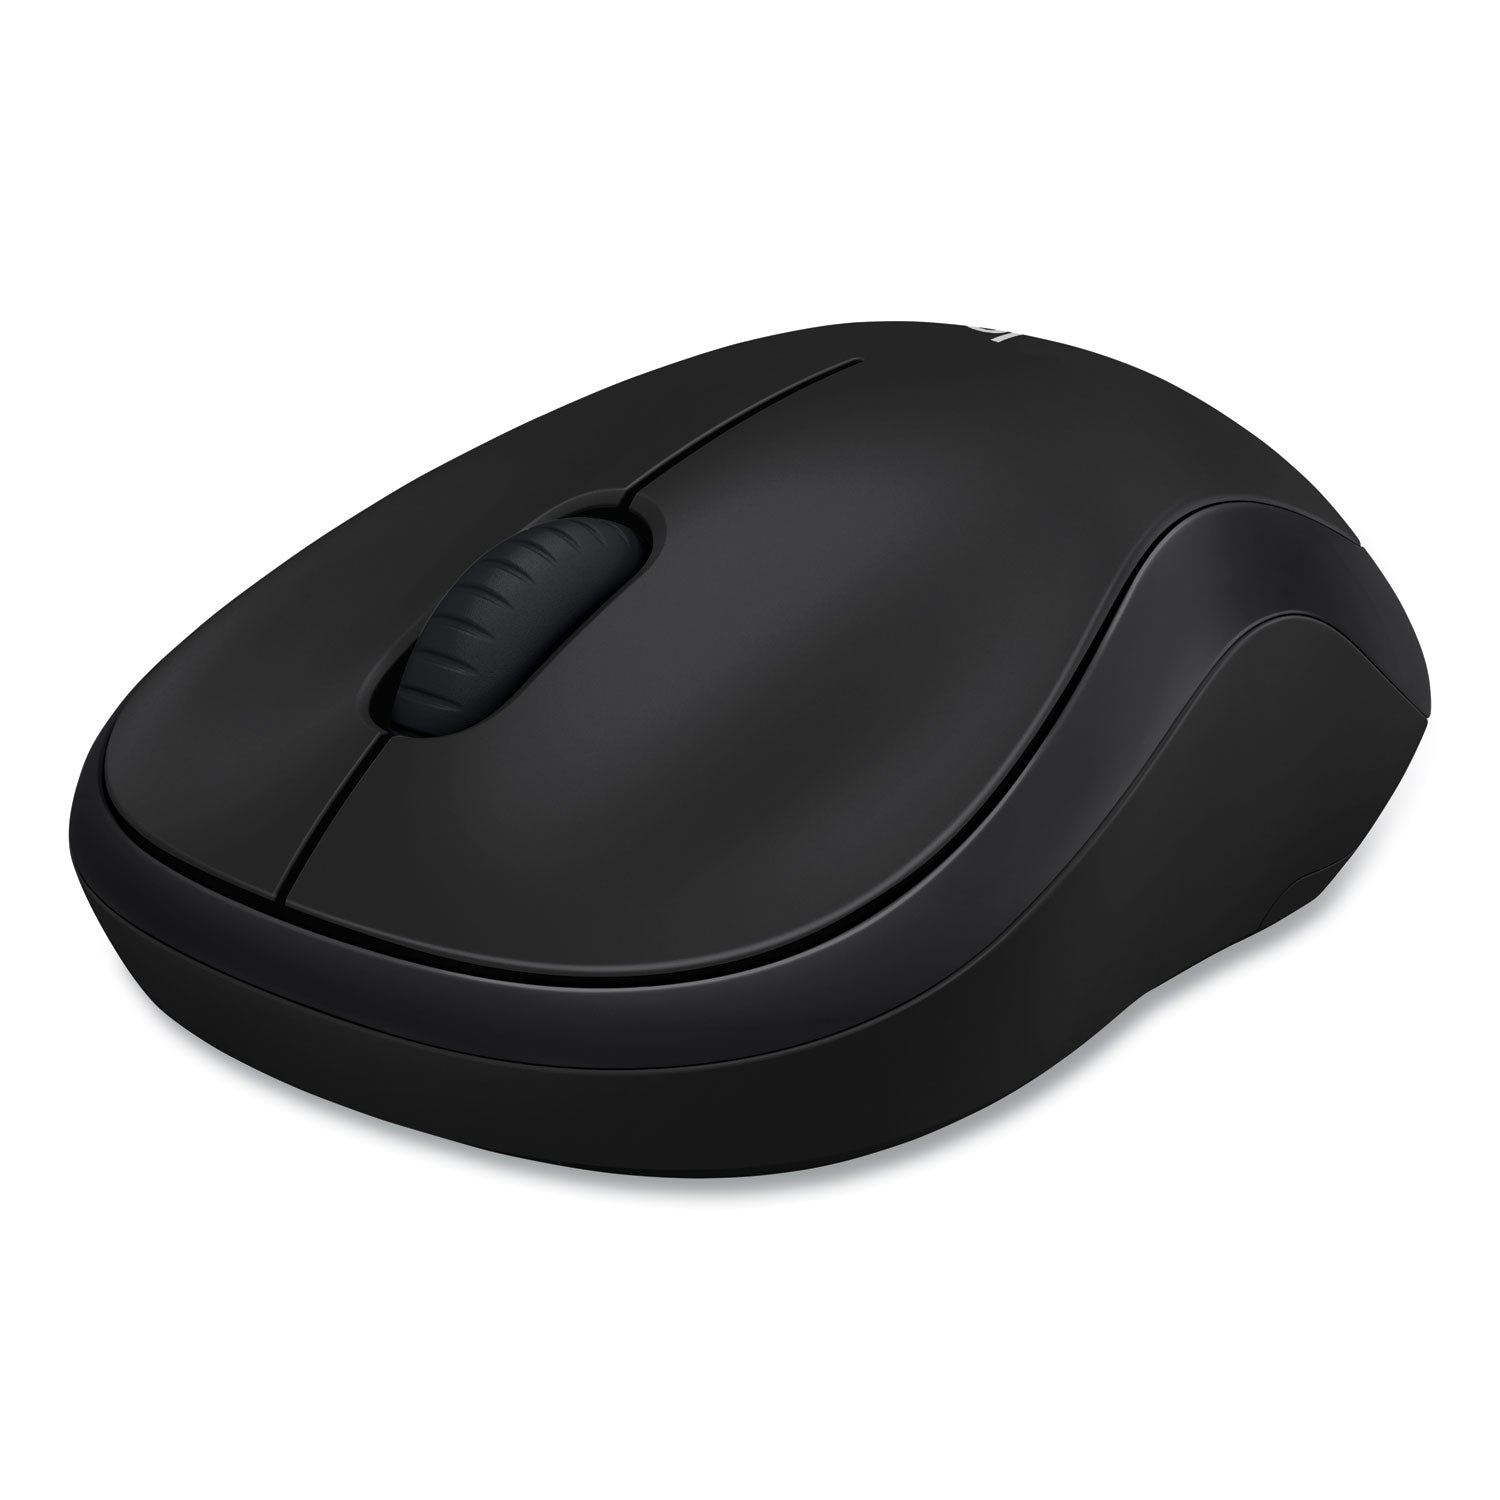 M185 Wireless Mouse, 2.4 GHz Frequency/30 ft Wireless Range, Left/Right Hand Use, Black - 